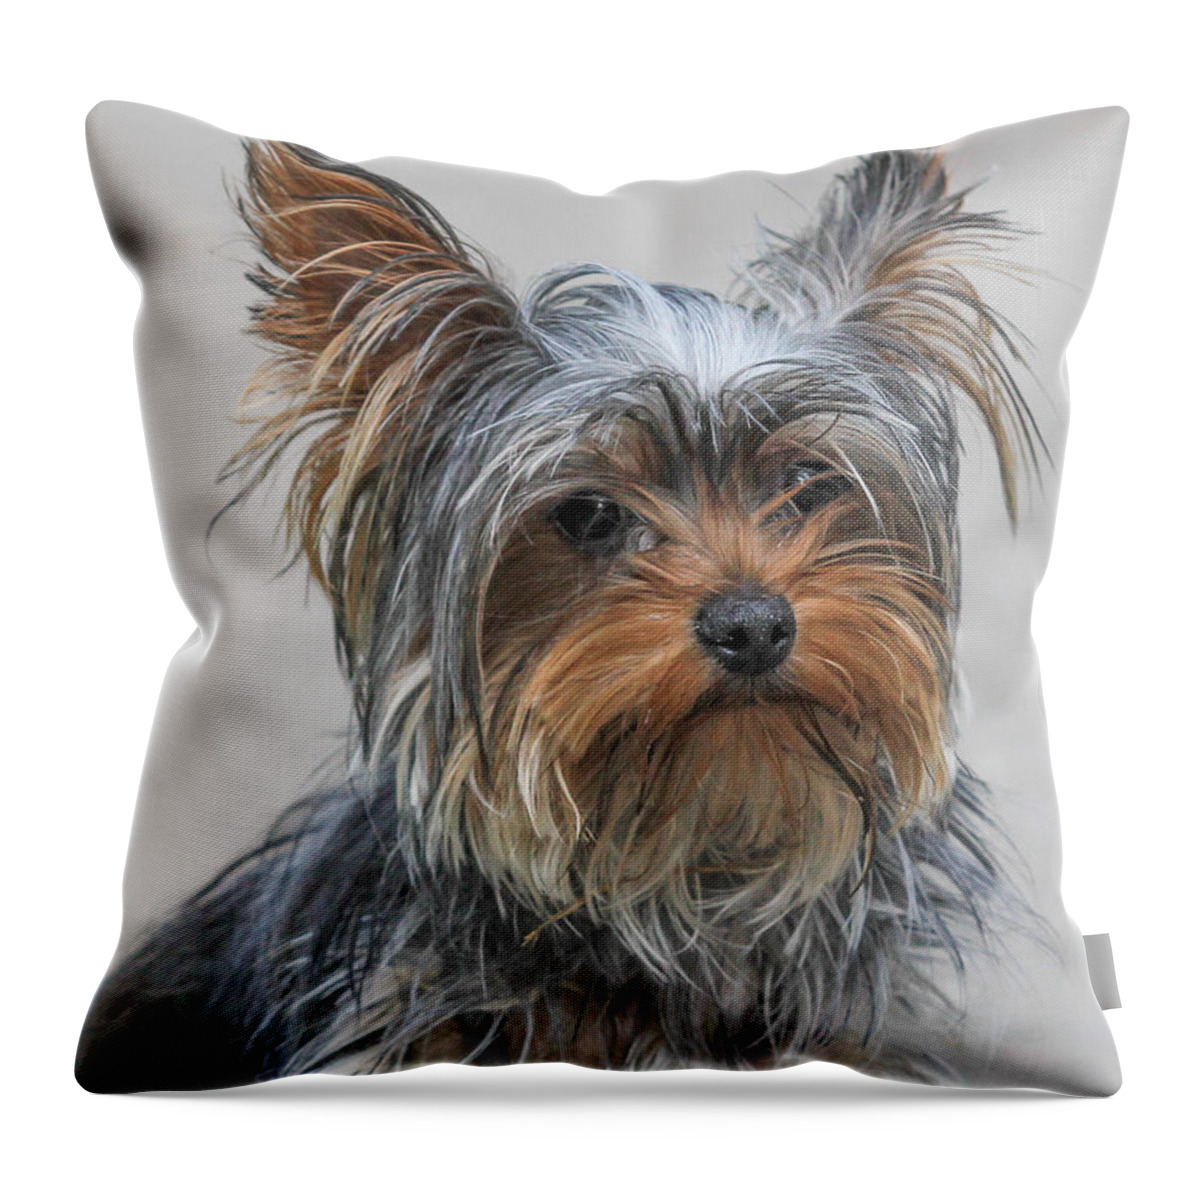 Domestic Dog Throw Pillow featuring the photograph Cute Yorky Portrait by Jivko Nakev